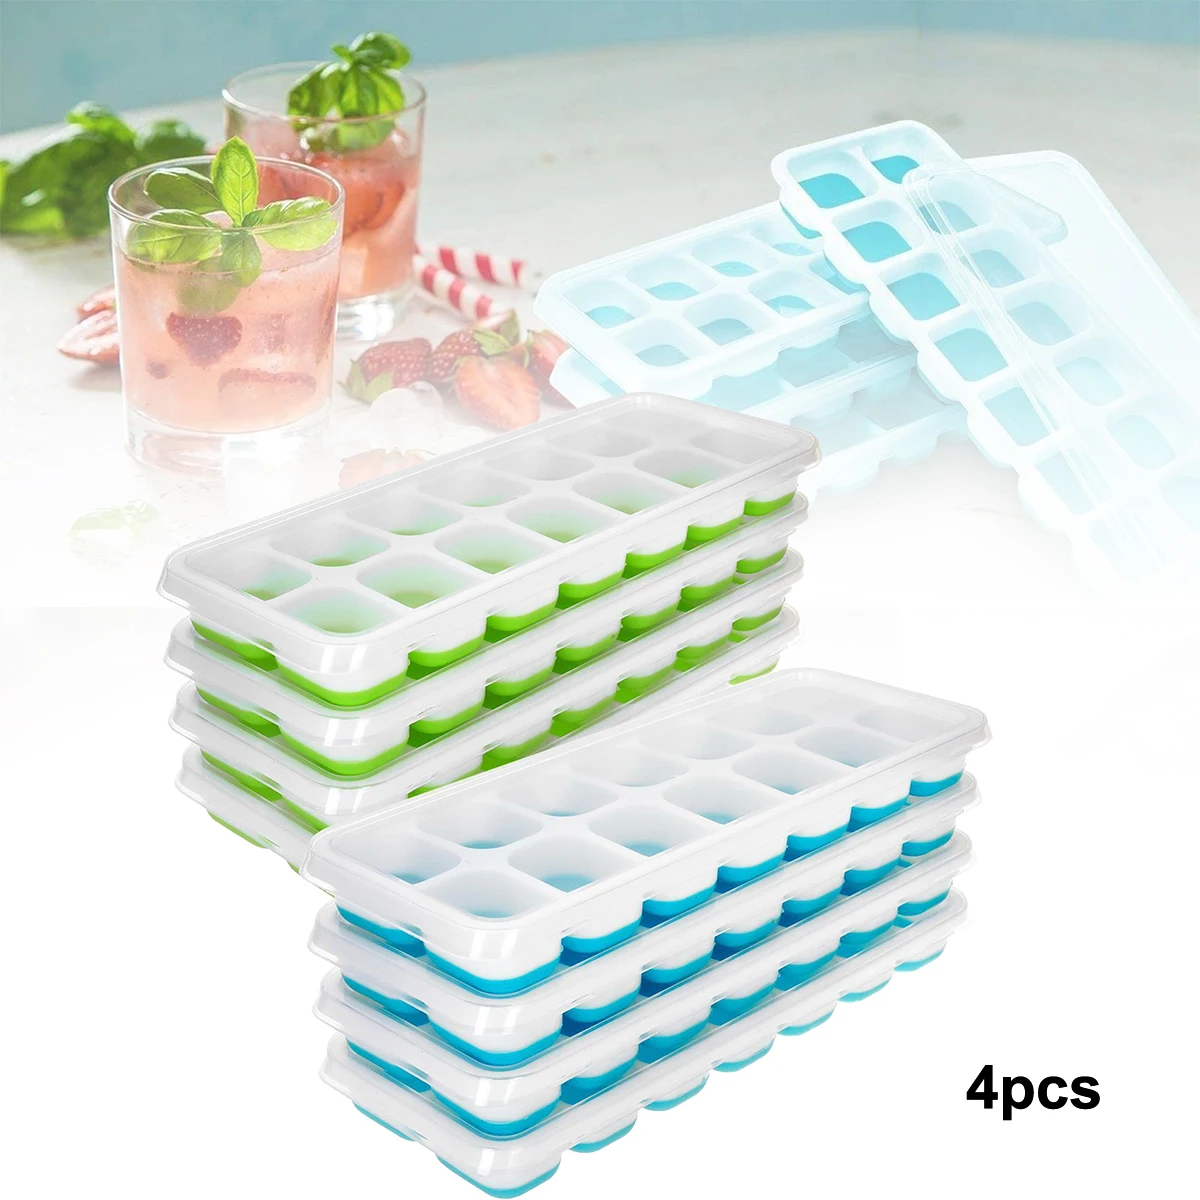 

4pcs14 Compartments Soft Bottom Silicone Ice Compartment Mould Ice Box DIY Homemade Ice Cream Ice Cube Mould with Lid